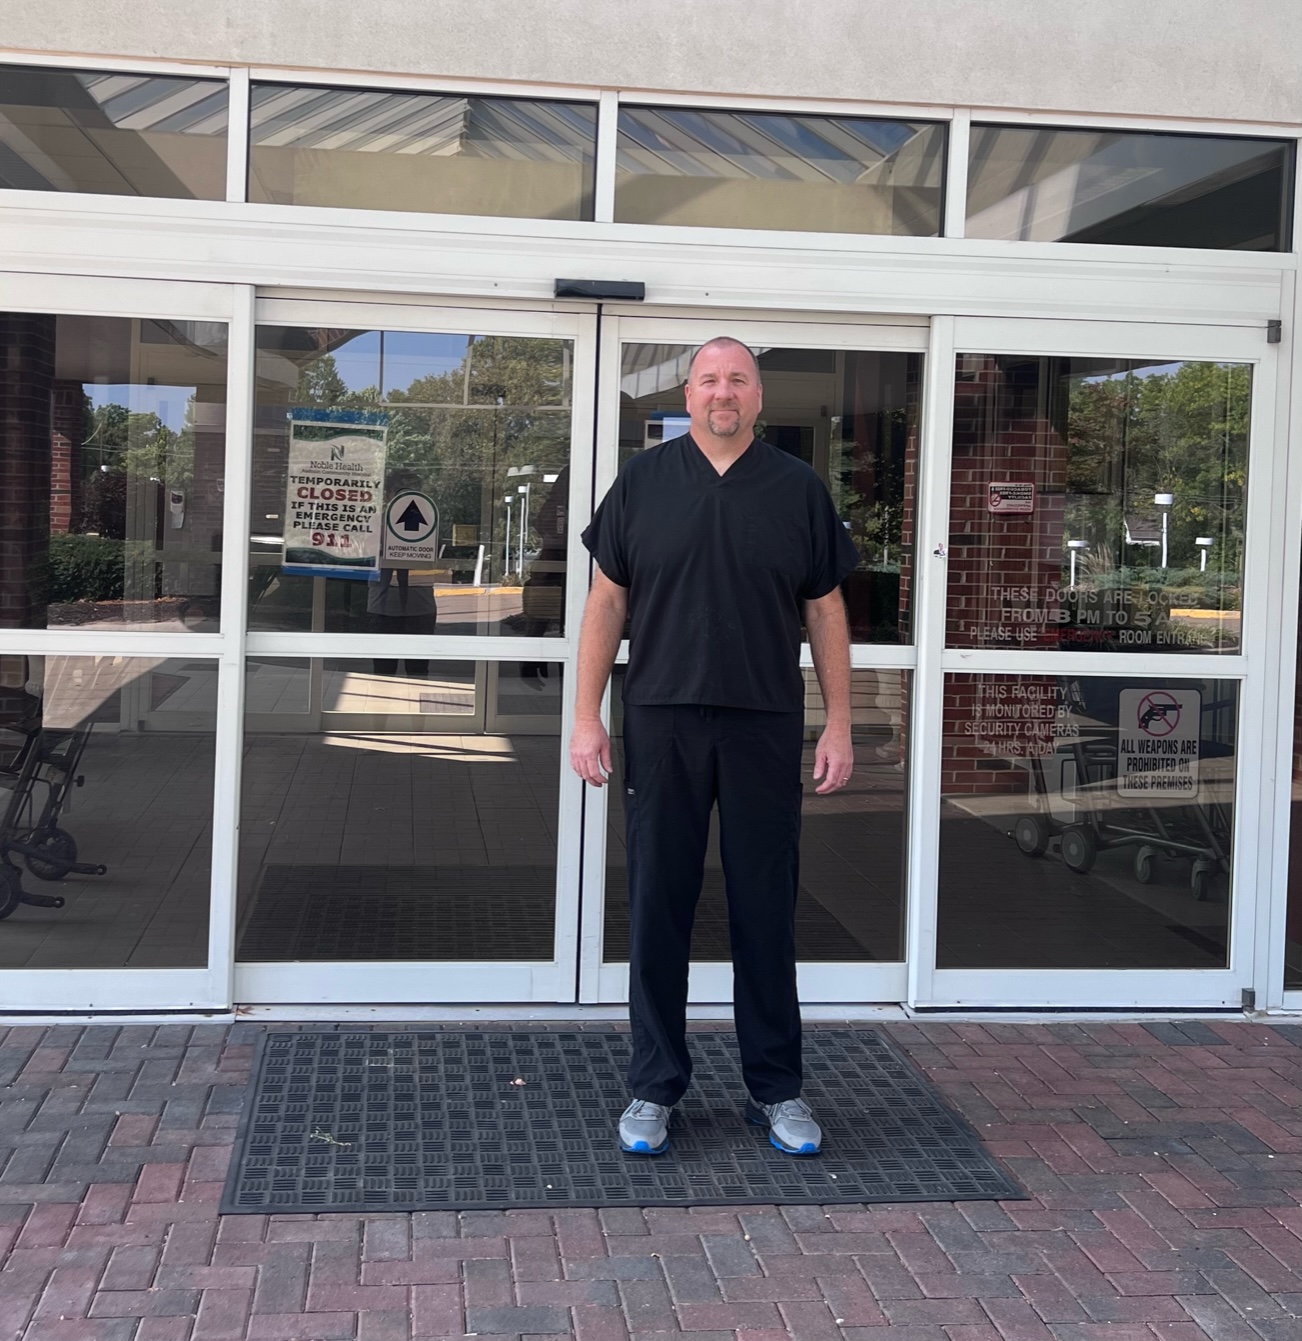 A photo shows Paul Huemann standing in front of the closed doors of Audrain Community Hospital.